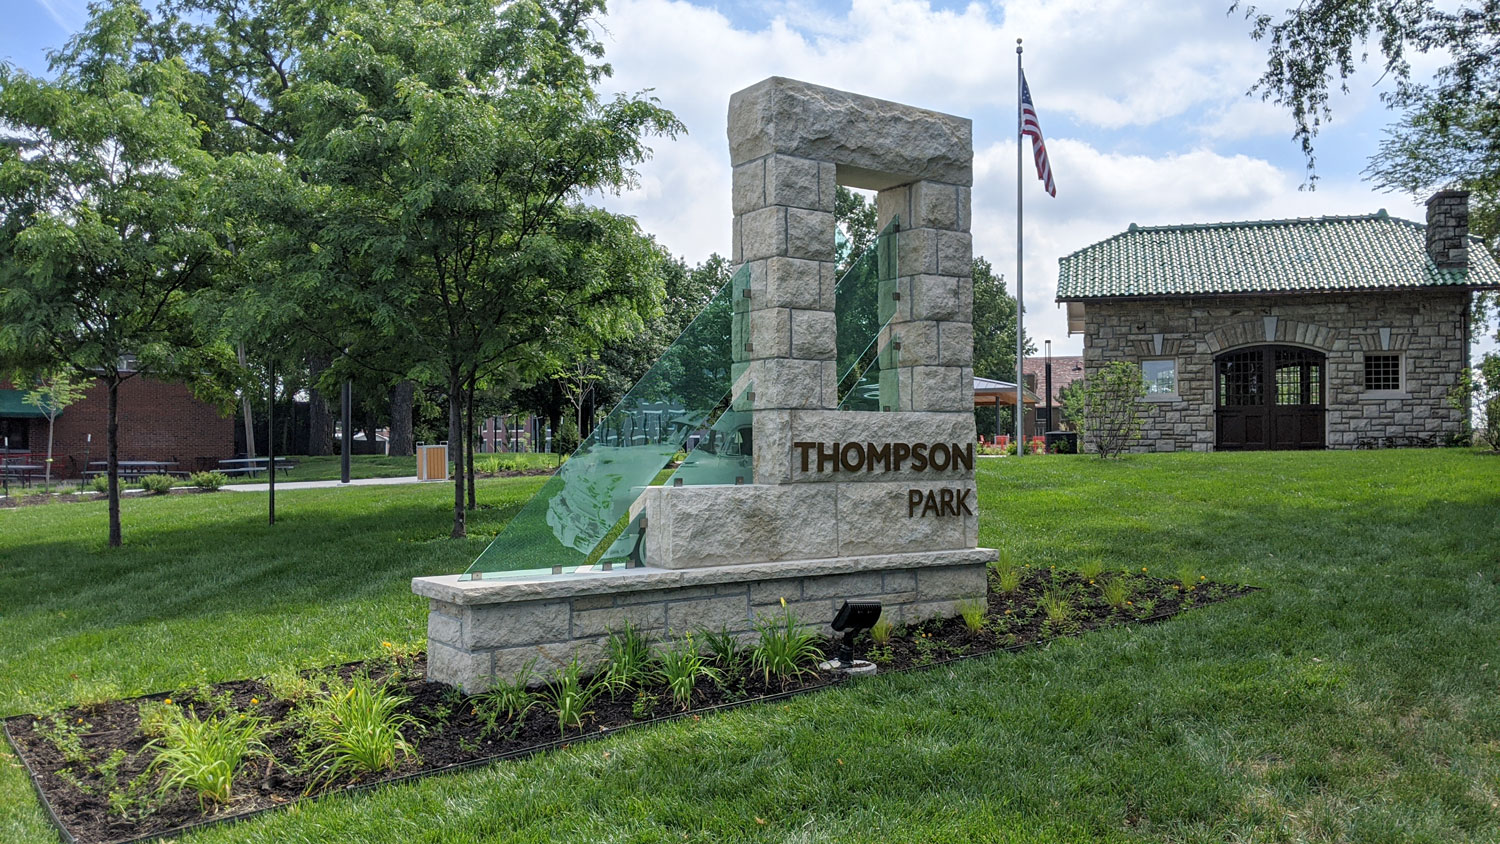 This is an image of downtown overland park thompson park west entrance strang carriage house sign web